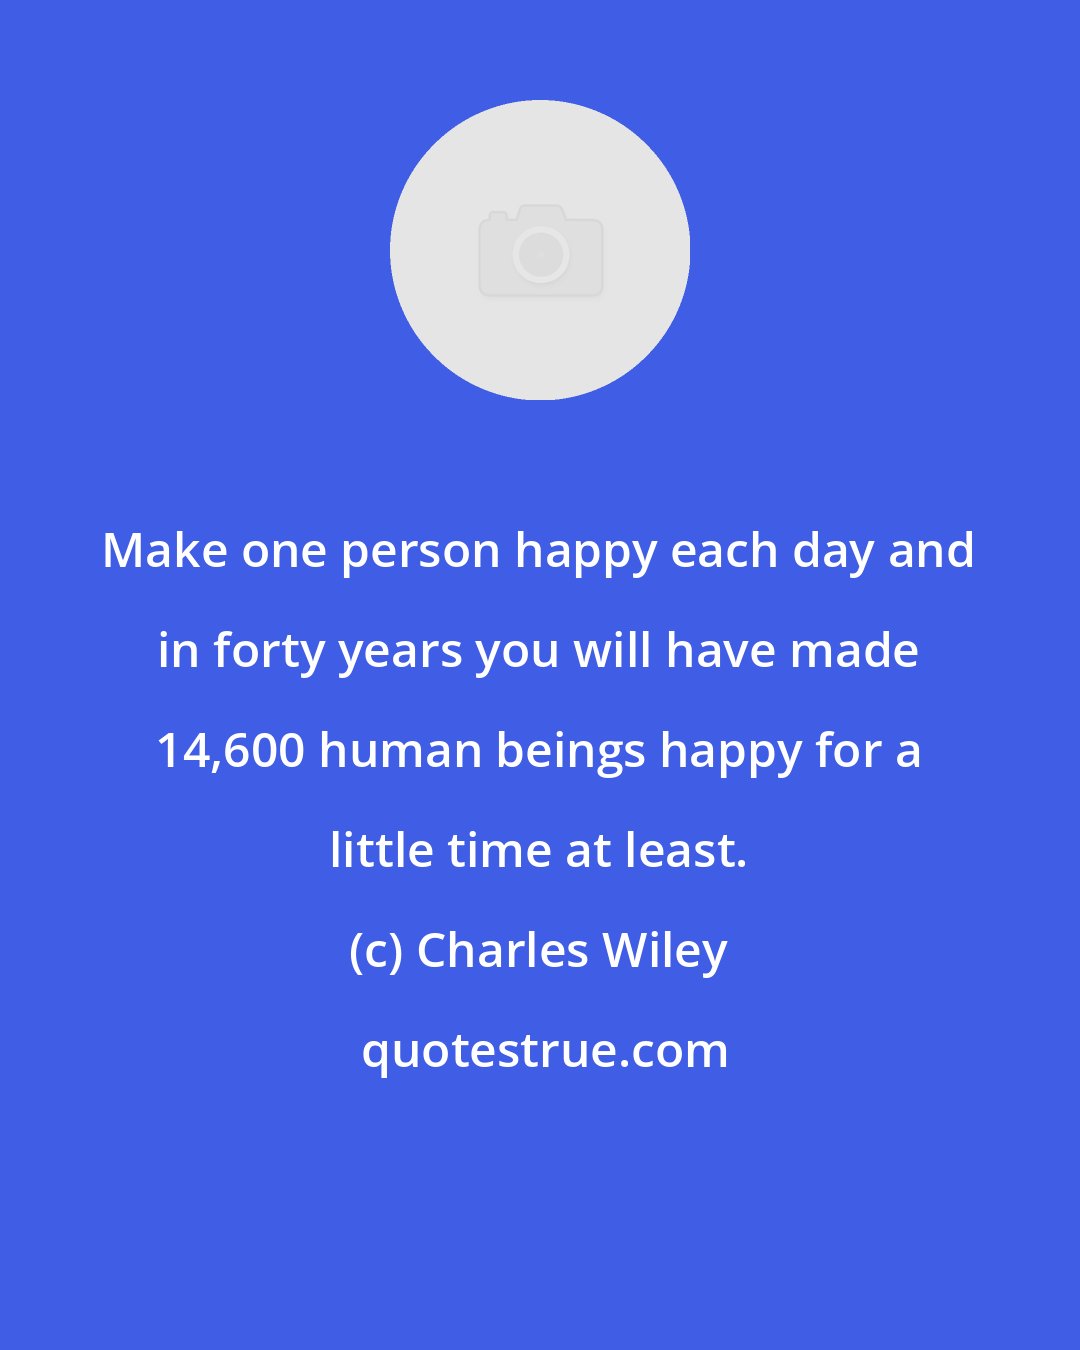 Charles Wiley: Make one person happy each day and in forty years you will have made 14,600 human beings happy for a little time at least.